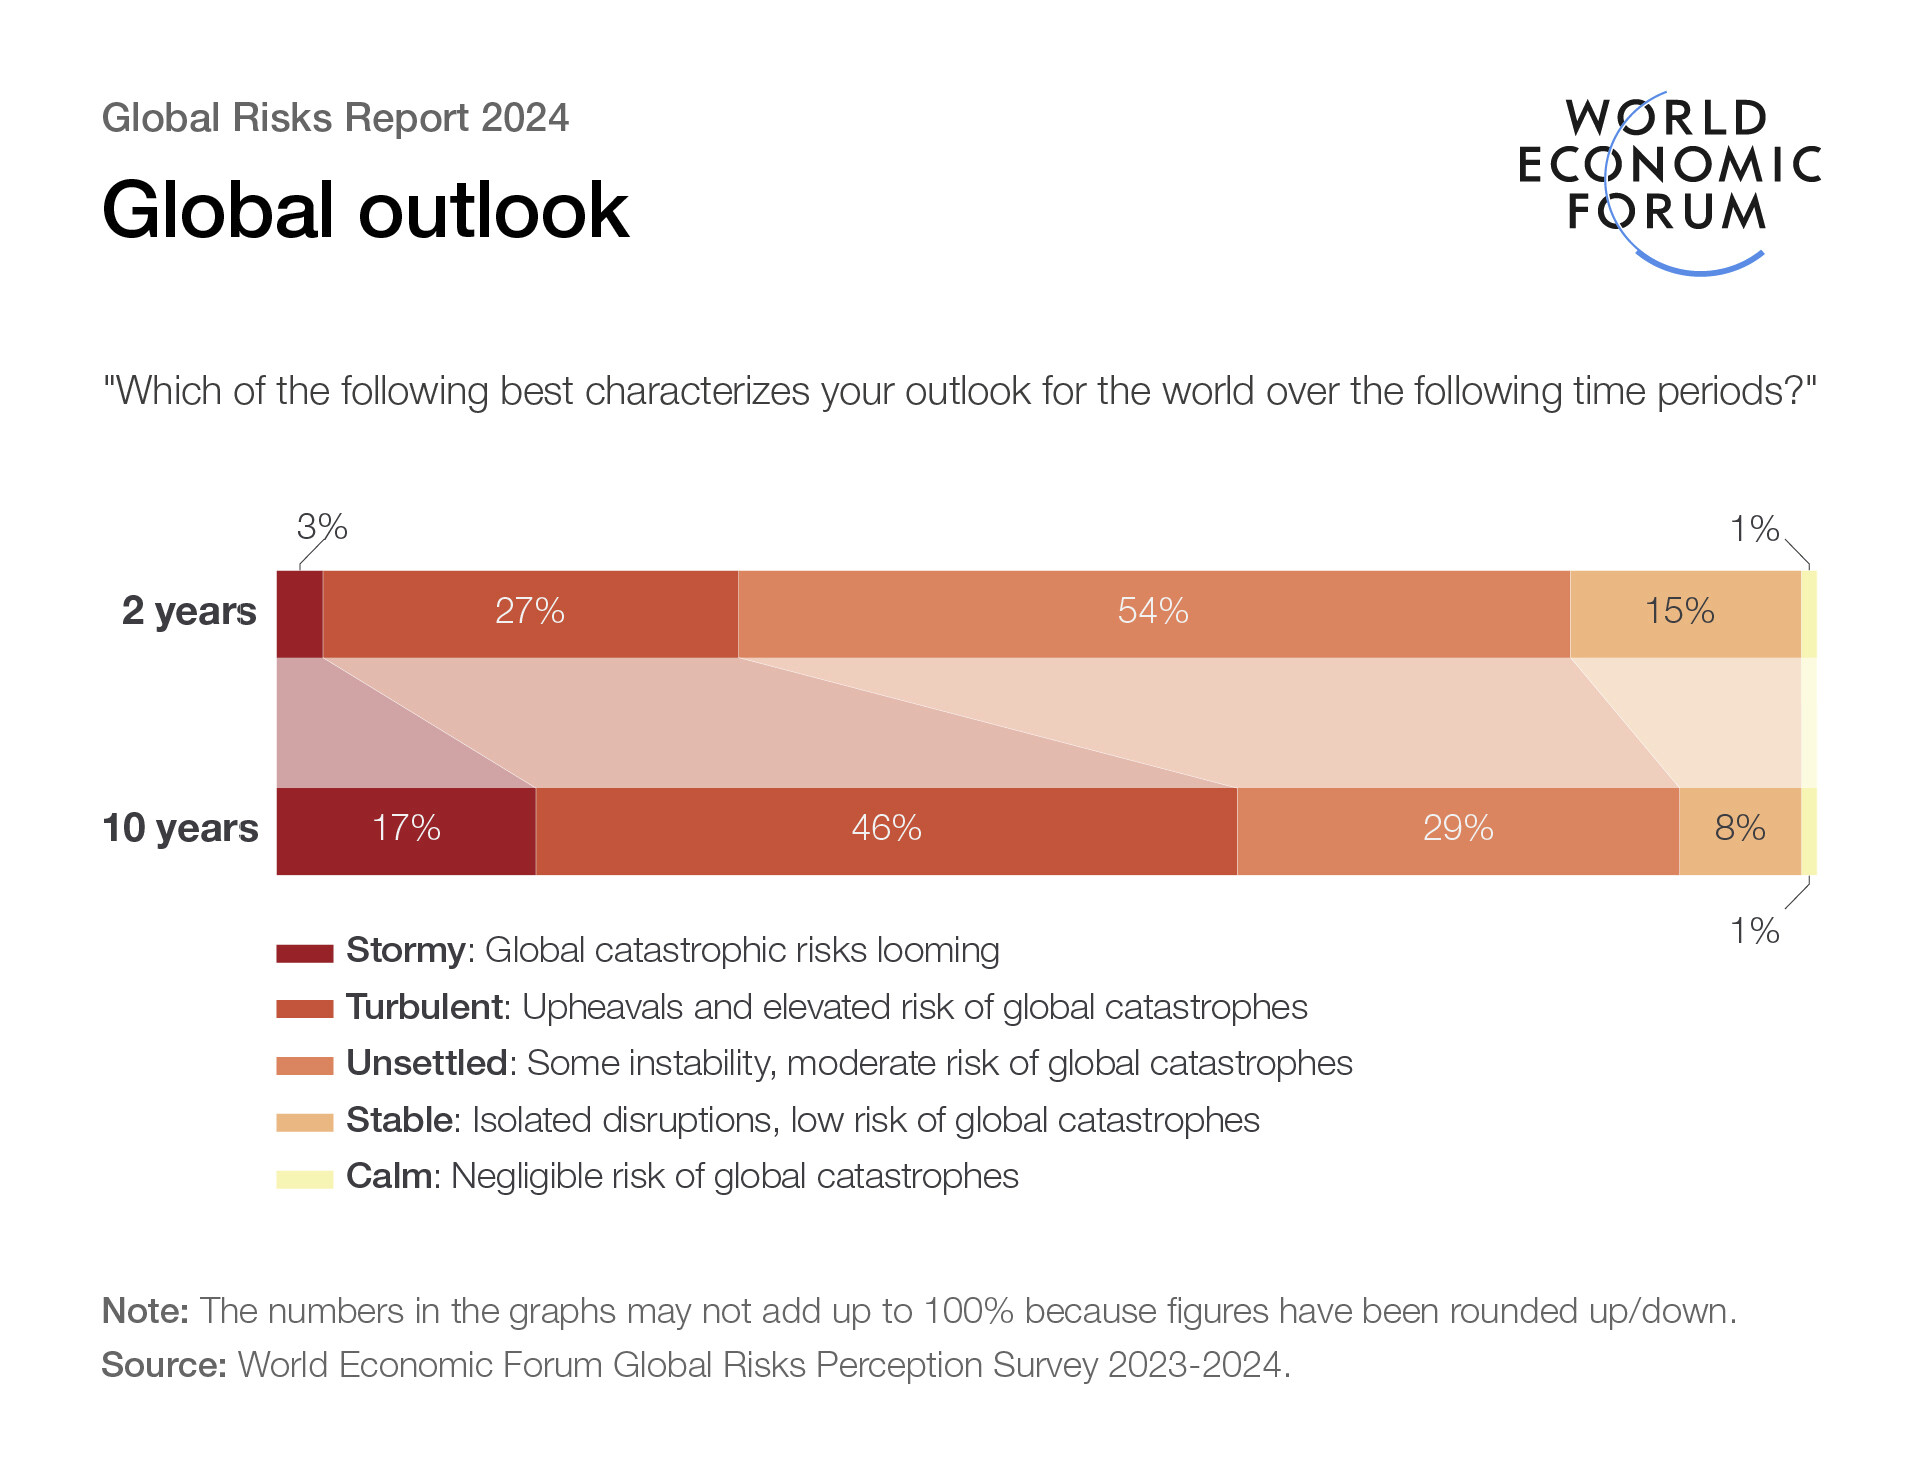 A chart showing the global outlook for the next 2 and 10 years.